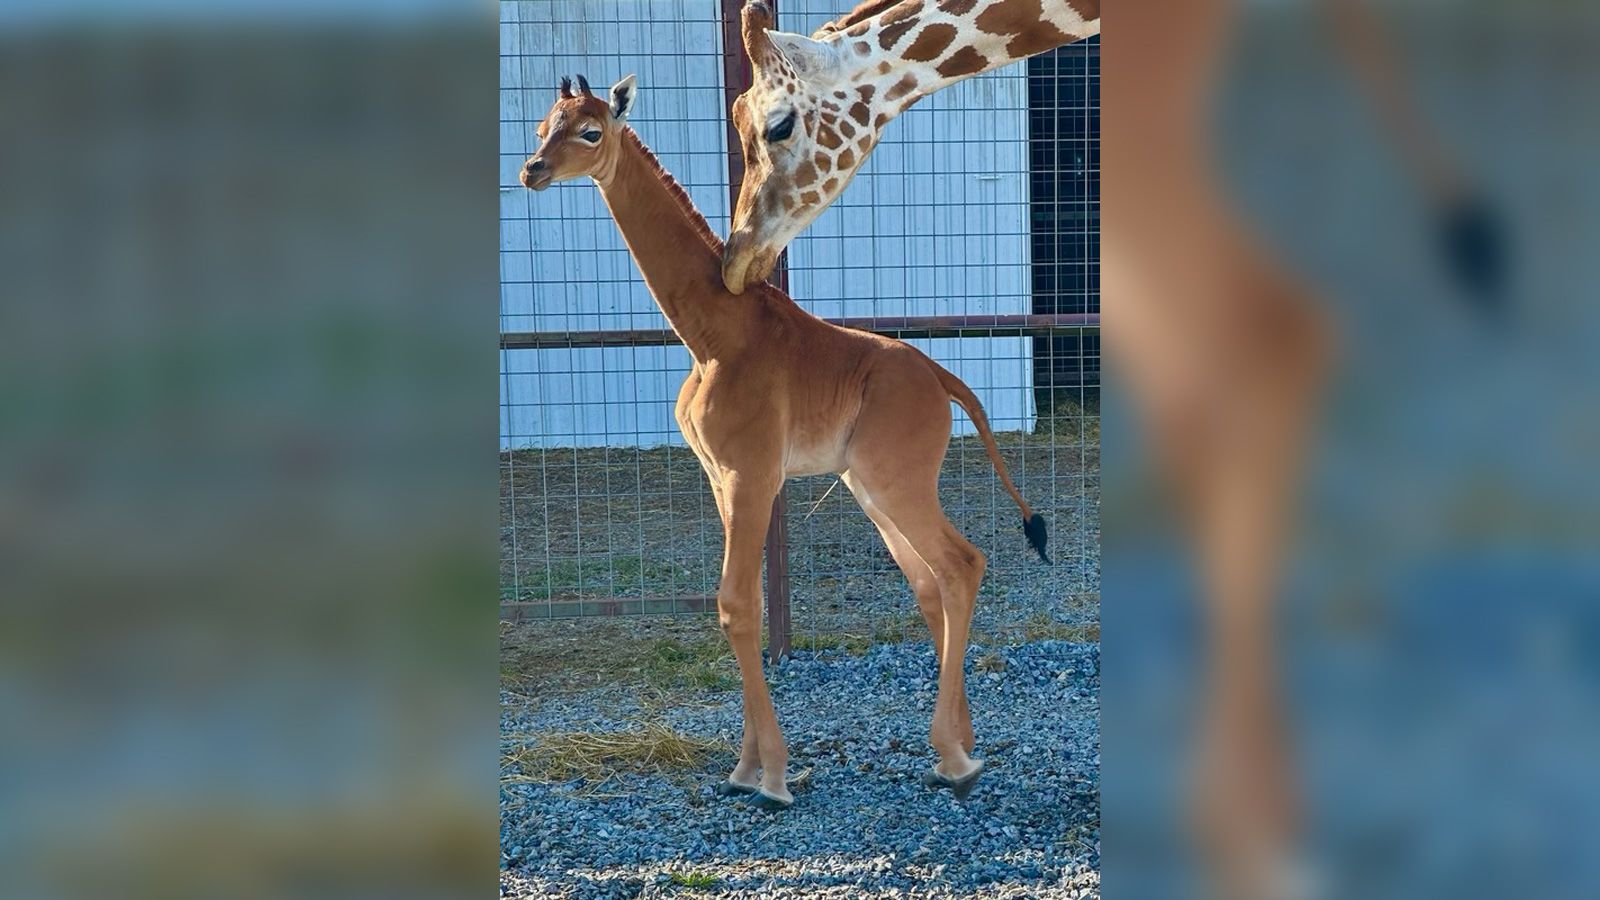 There’s a brand new spotless superstar on the scene at a Tennessee zoo. She doesn’t have a name...